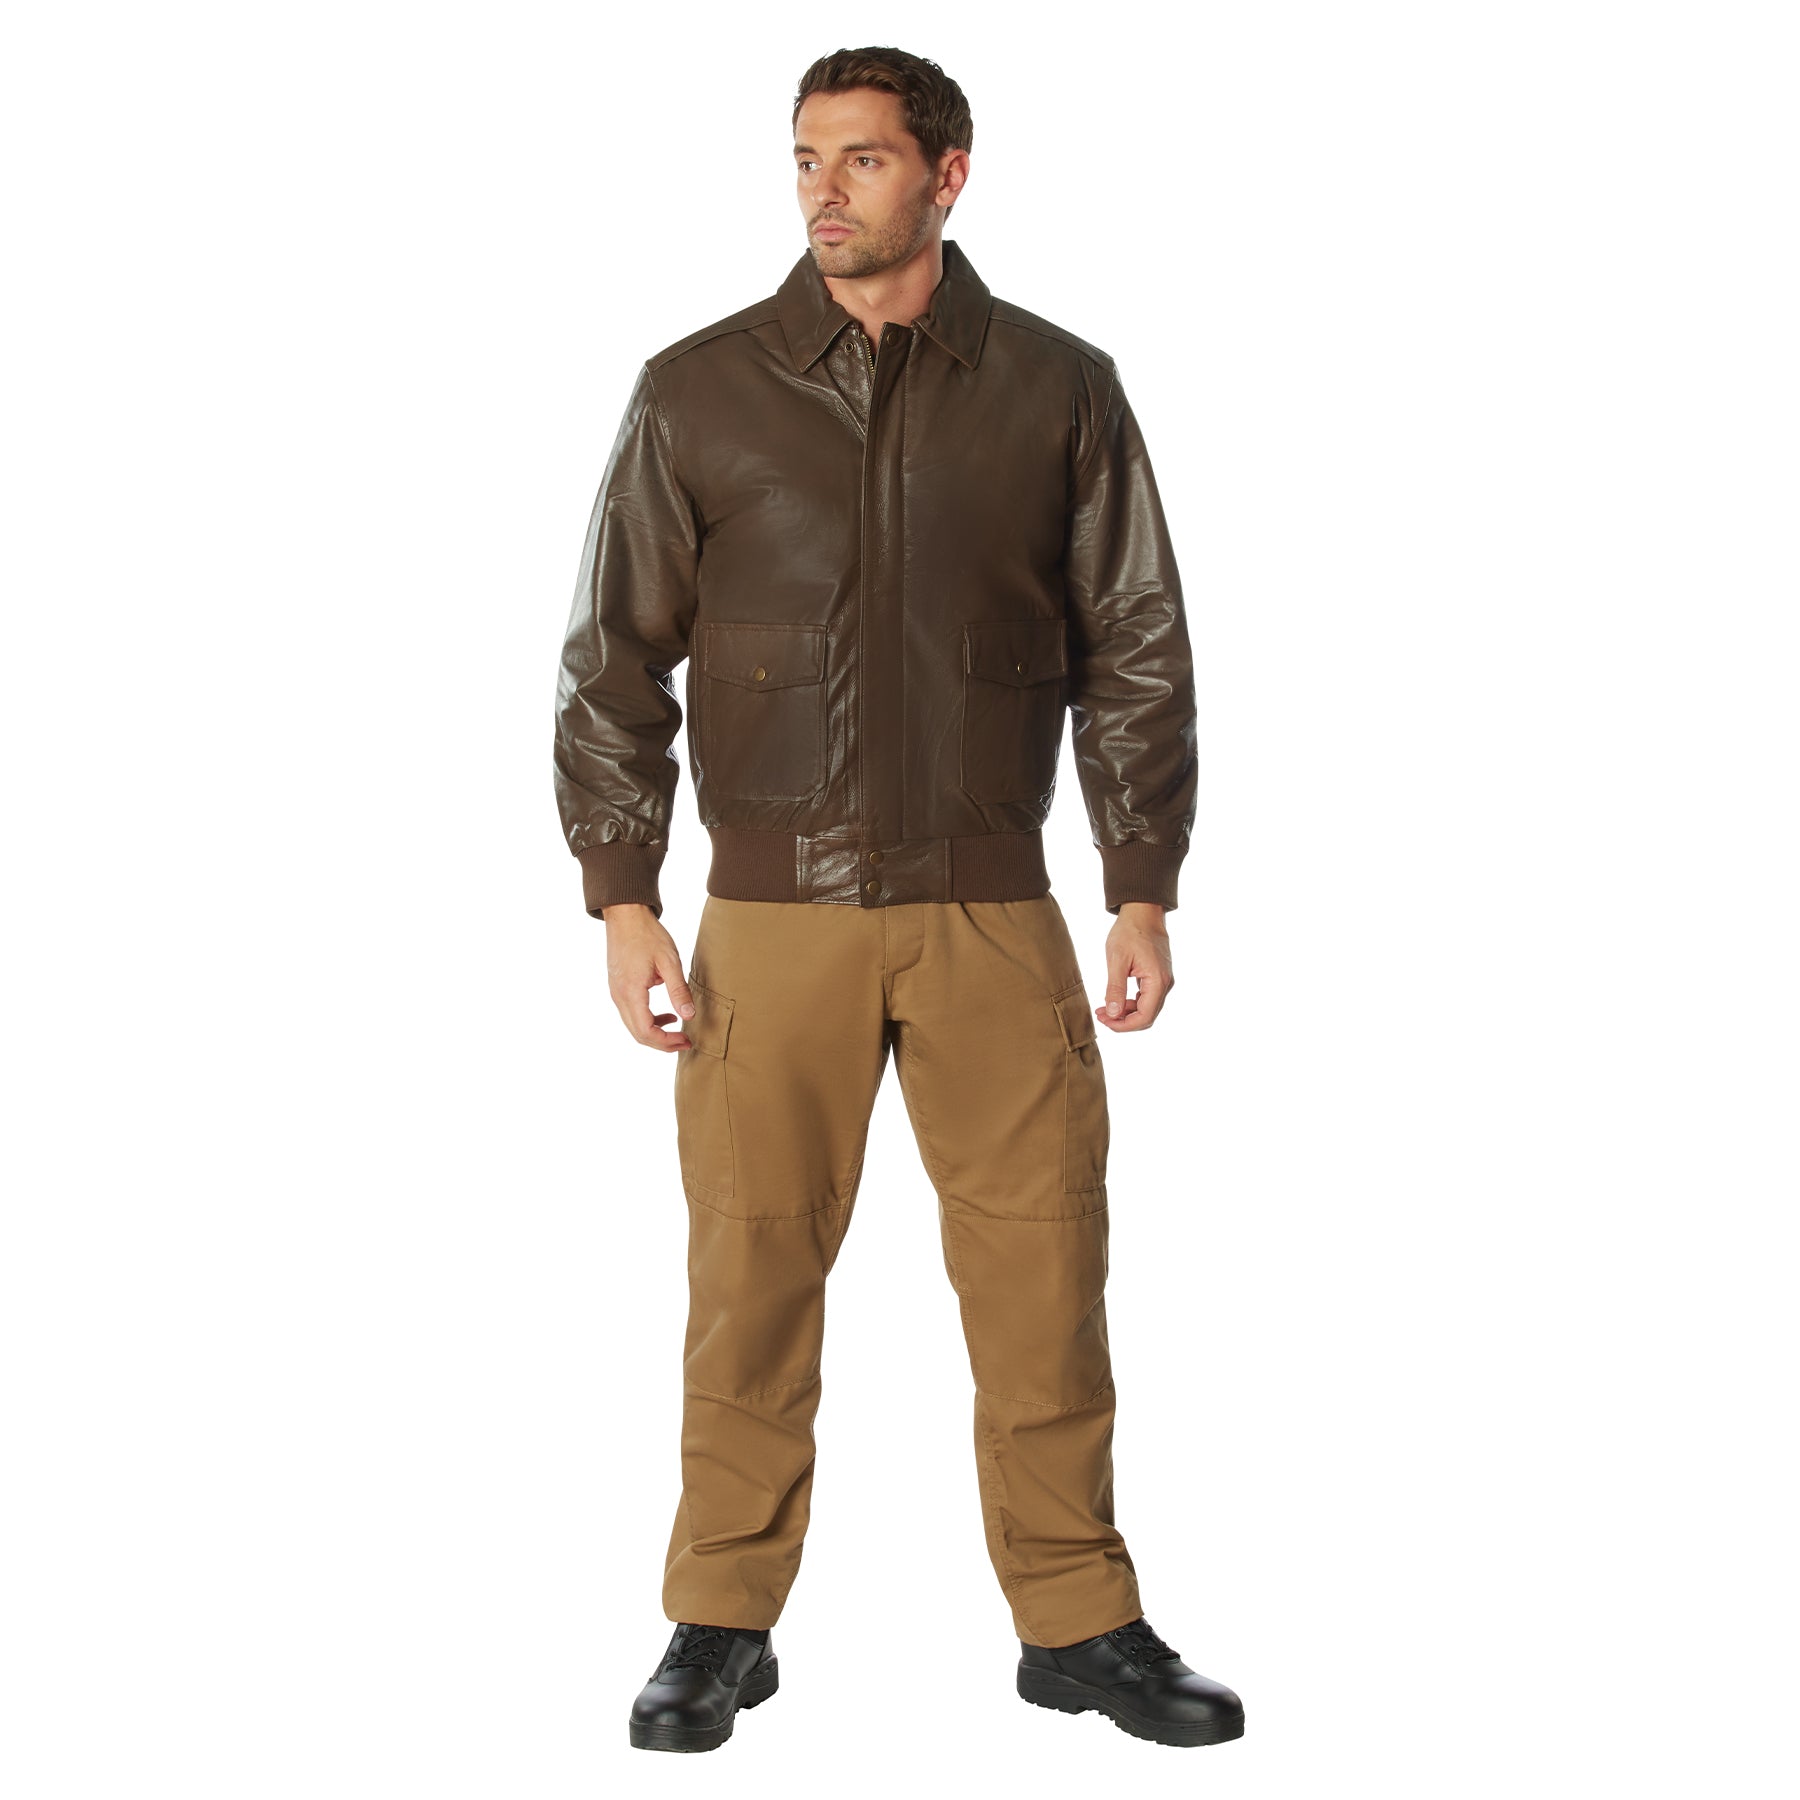 Rothco Classic A-2 Genuine Nappa Leather Flight Jacket 7577 - Clothing & Accessories